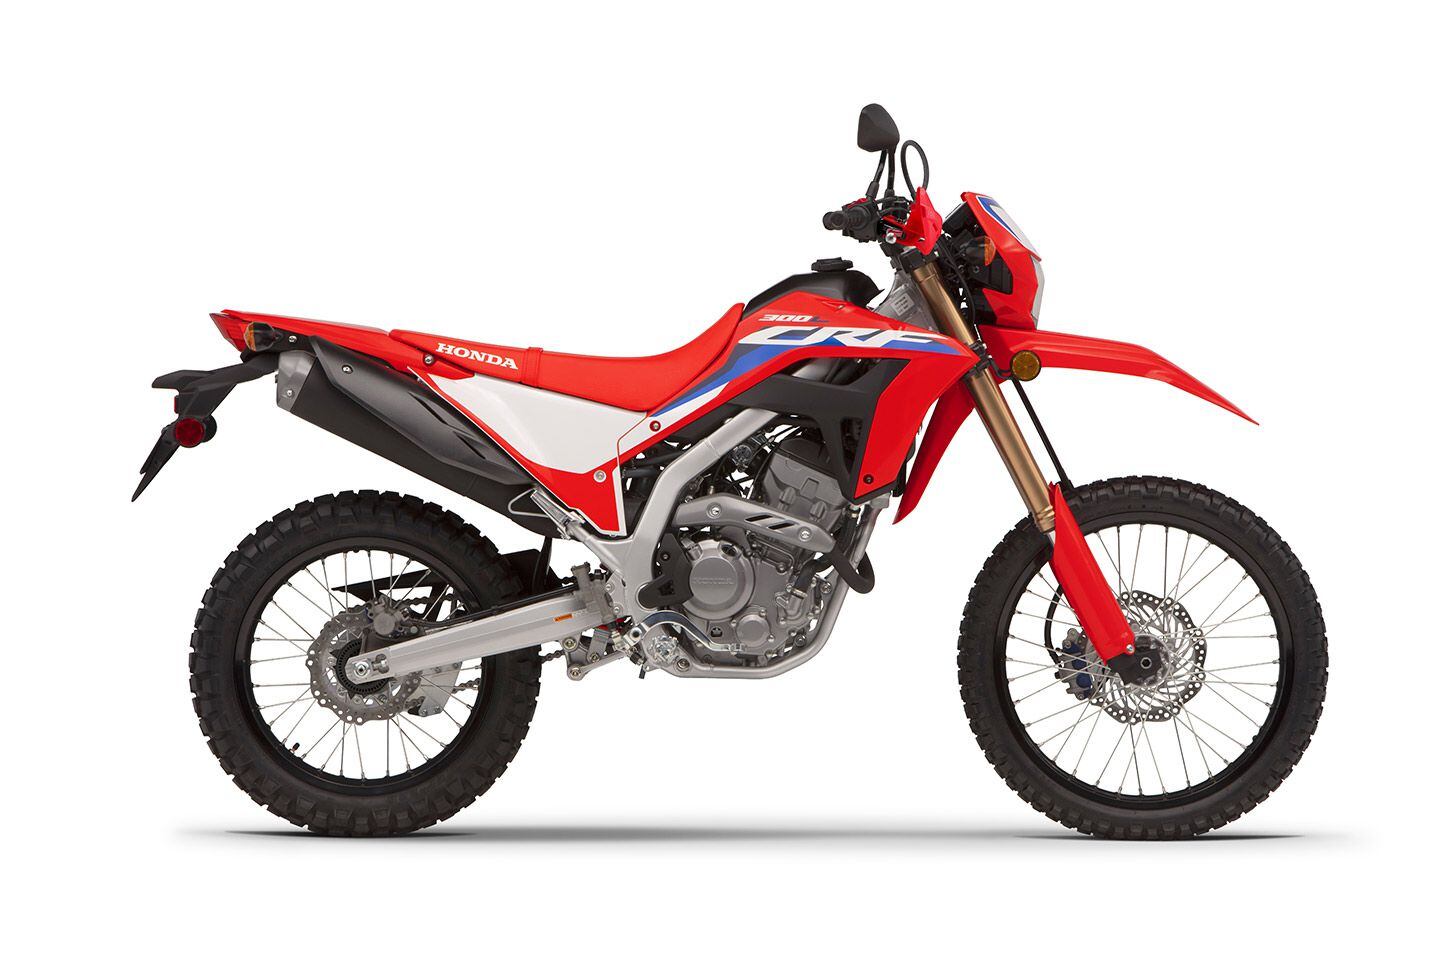 The CRF300L ($5,399) and ABS-equipped version ($5,699) will be available a month before the LS ($5,699).